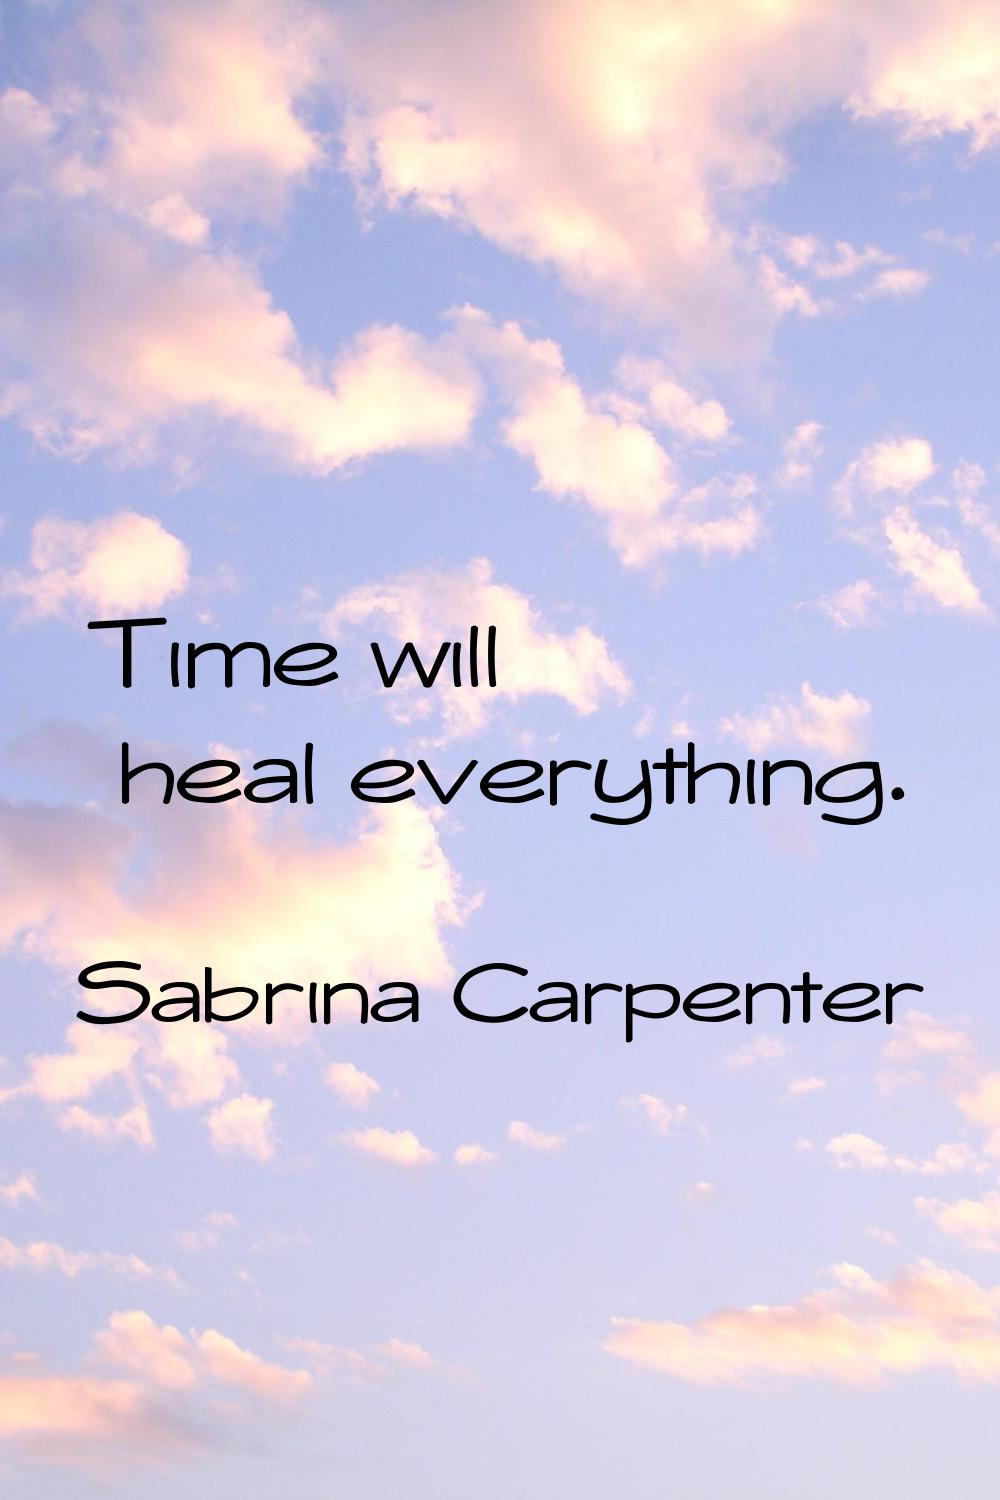 Time will heal everything.